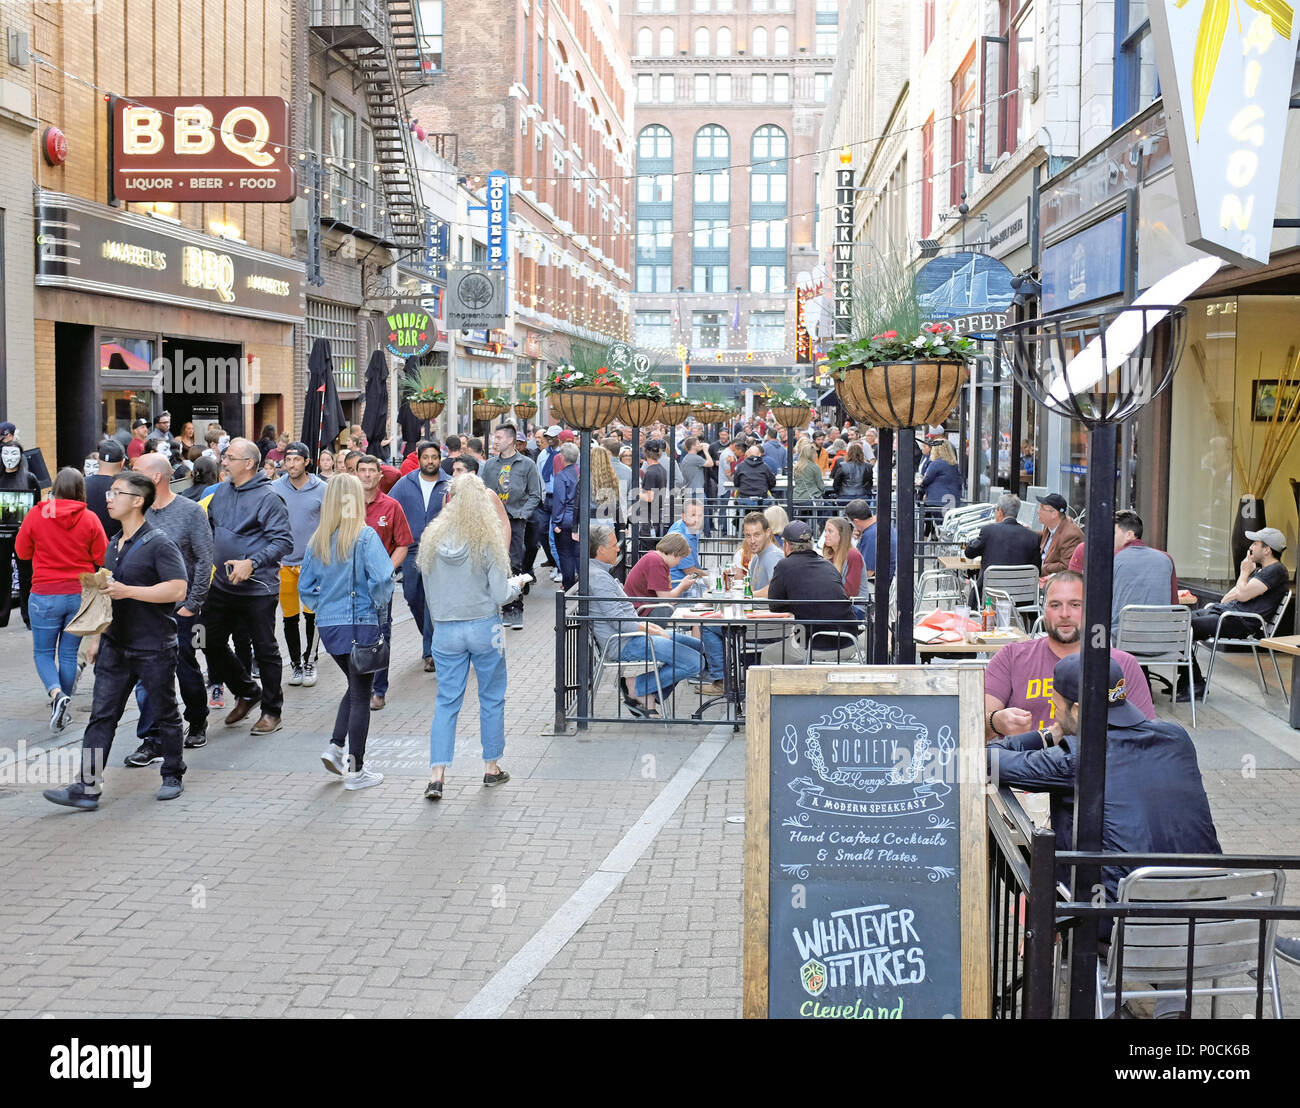 East 4th in downtown Cleveland, Ohio, USA is one of several entertainment districts with an outdoor dining and drinking scene Stock Photo